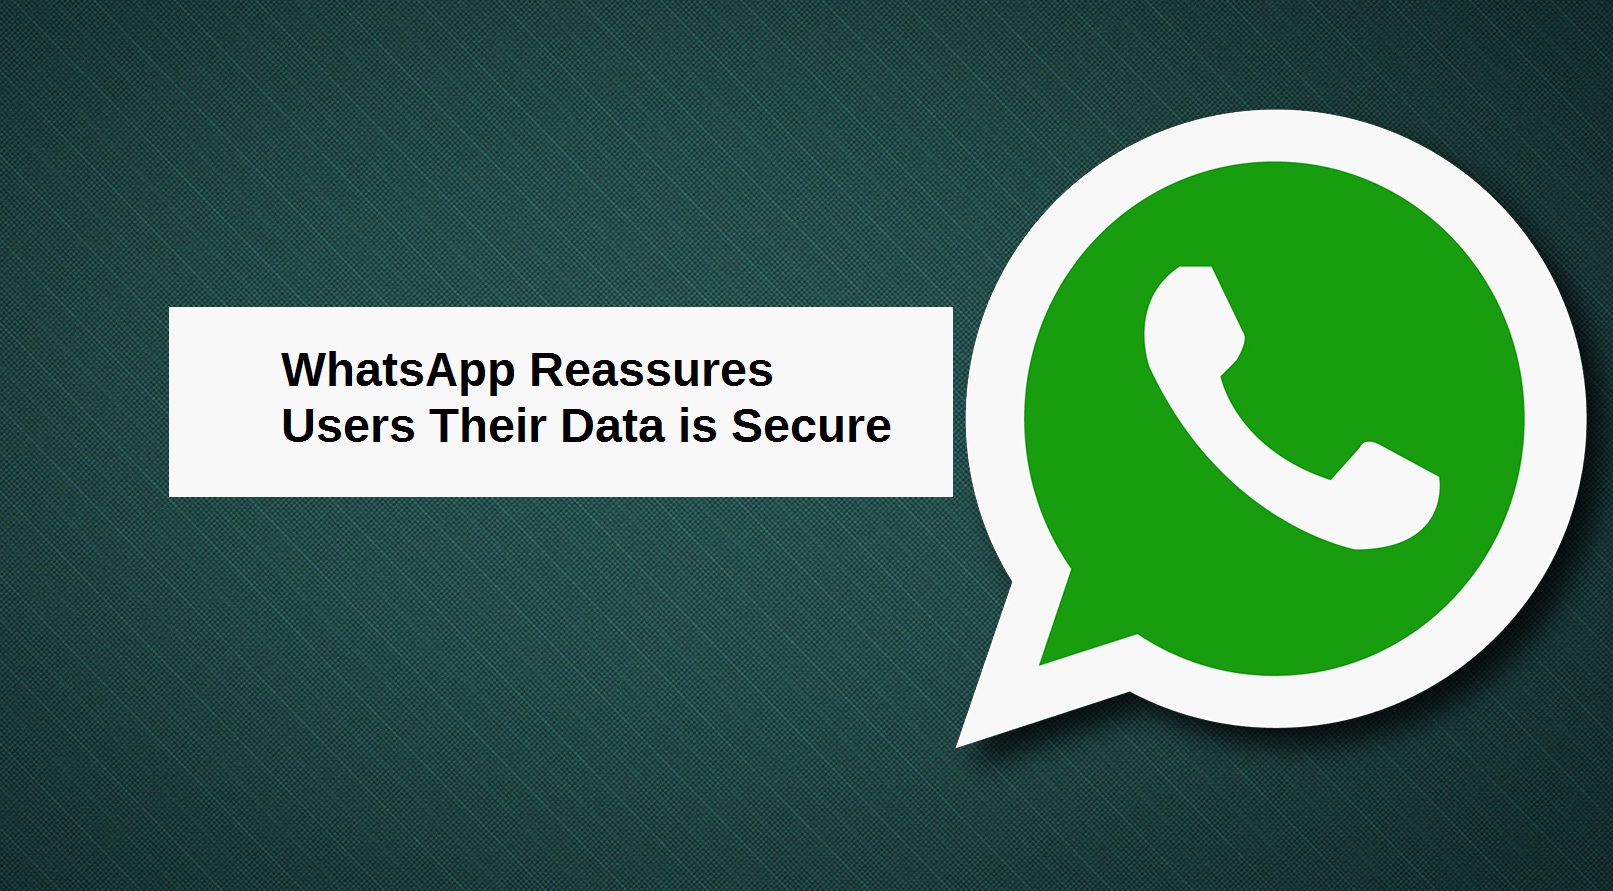 WhatsApp Reassures Users That Their Data Is Safe